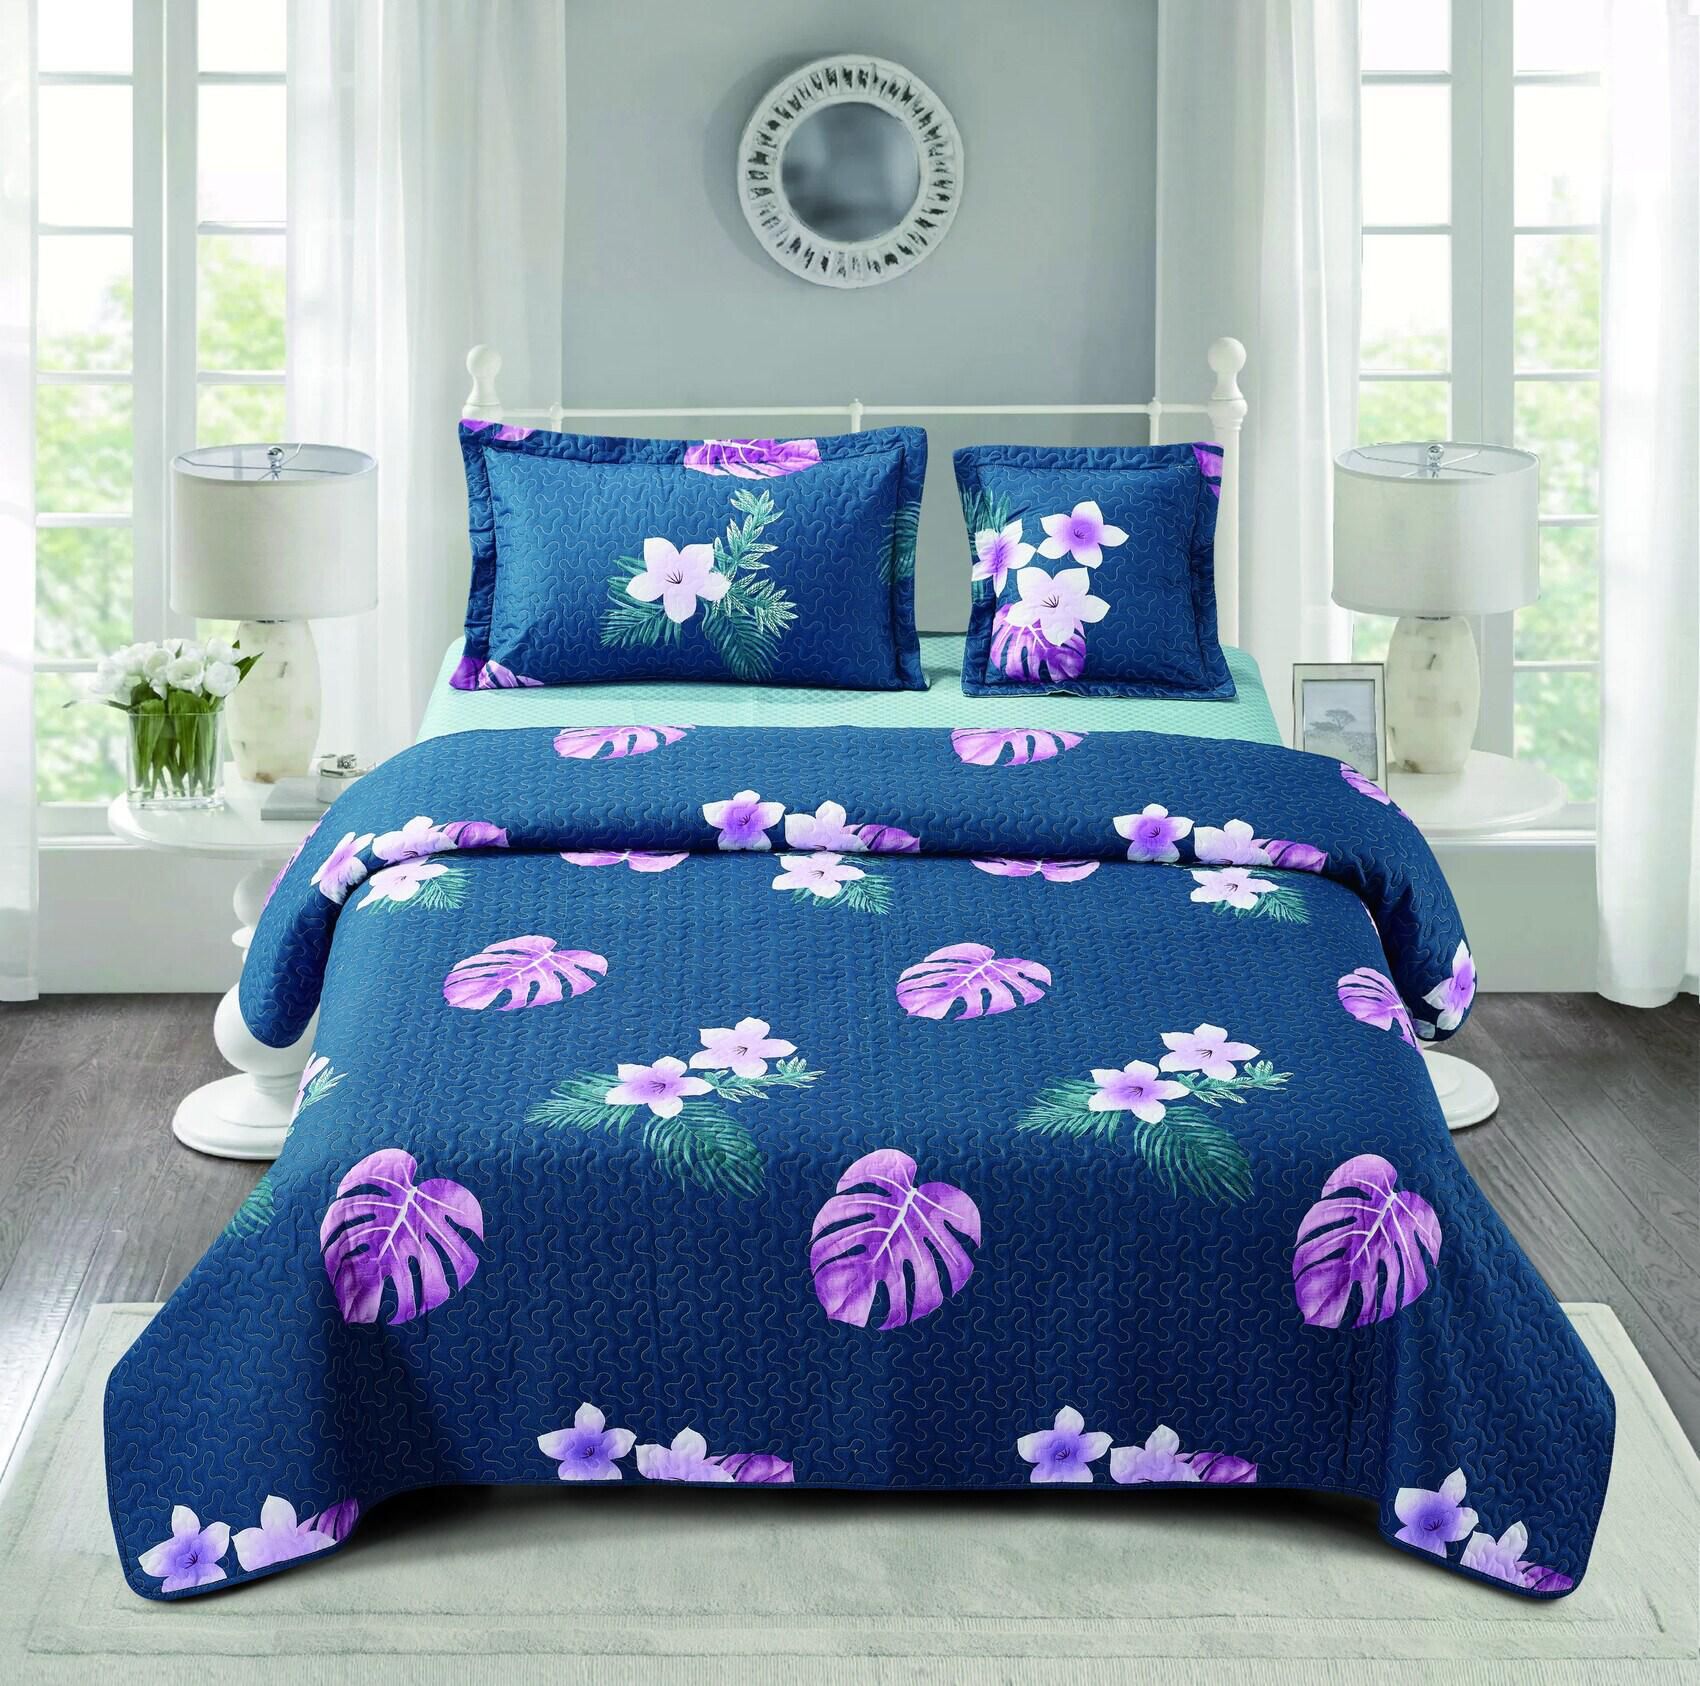 4 Piece Printed Compressed Comforter/Quilt/Bedspread Set Single Size ( Comforter + Fitted Sheet + 1 Small Pillow Case + 1 Large Pillow Case) Chathams Blue